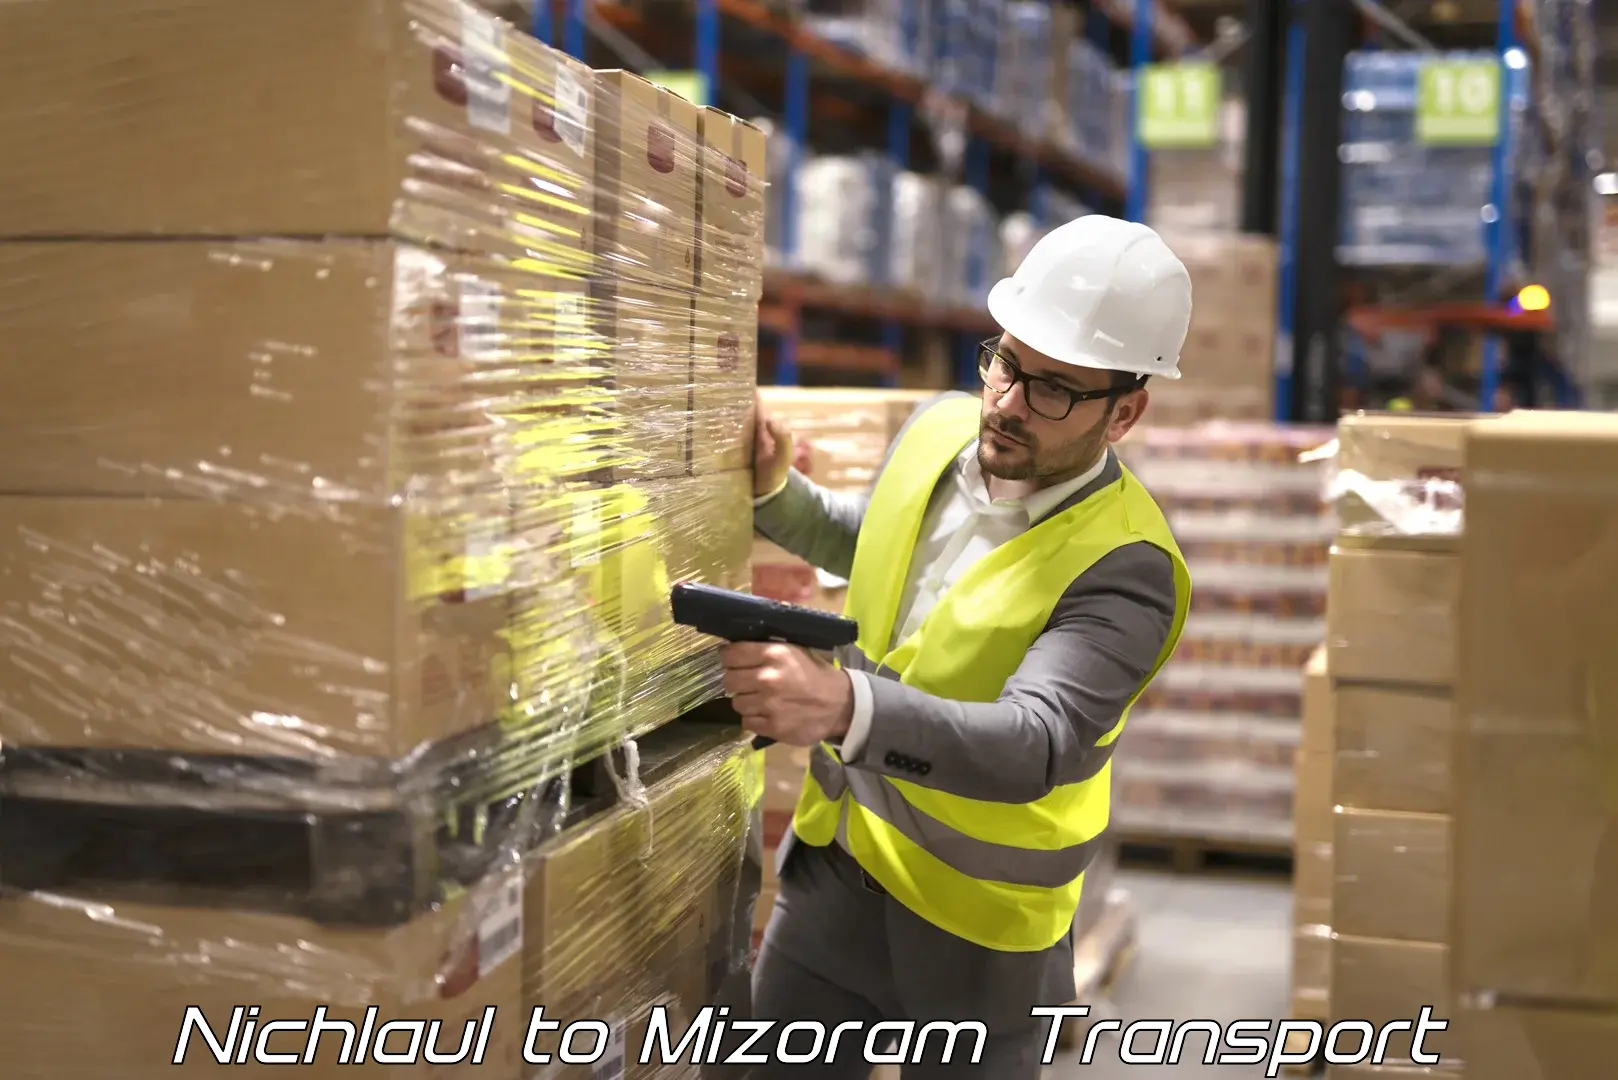 Material transport services Nichlaul to Mizoram